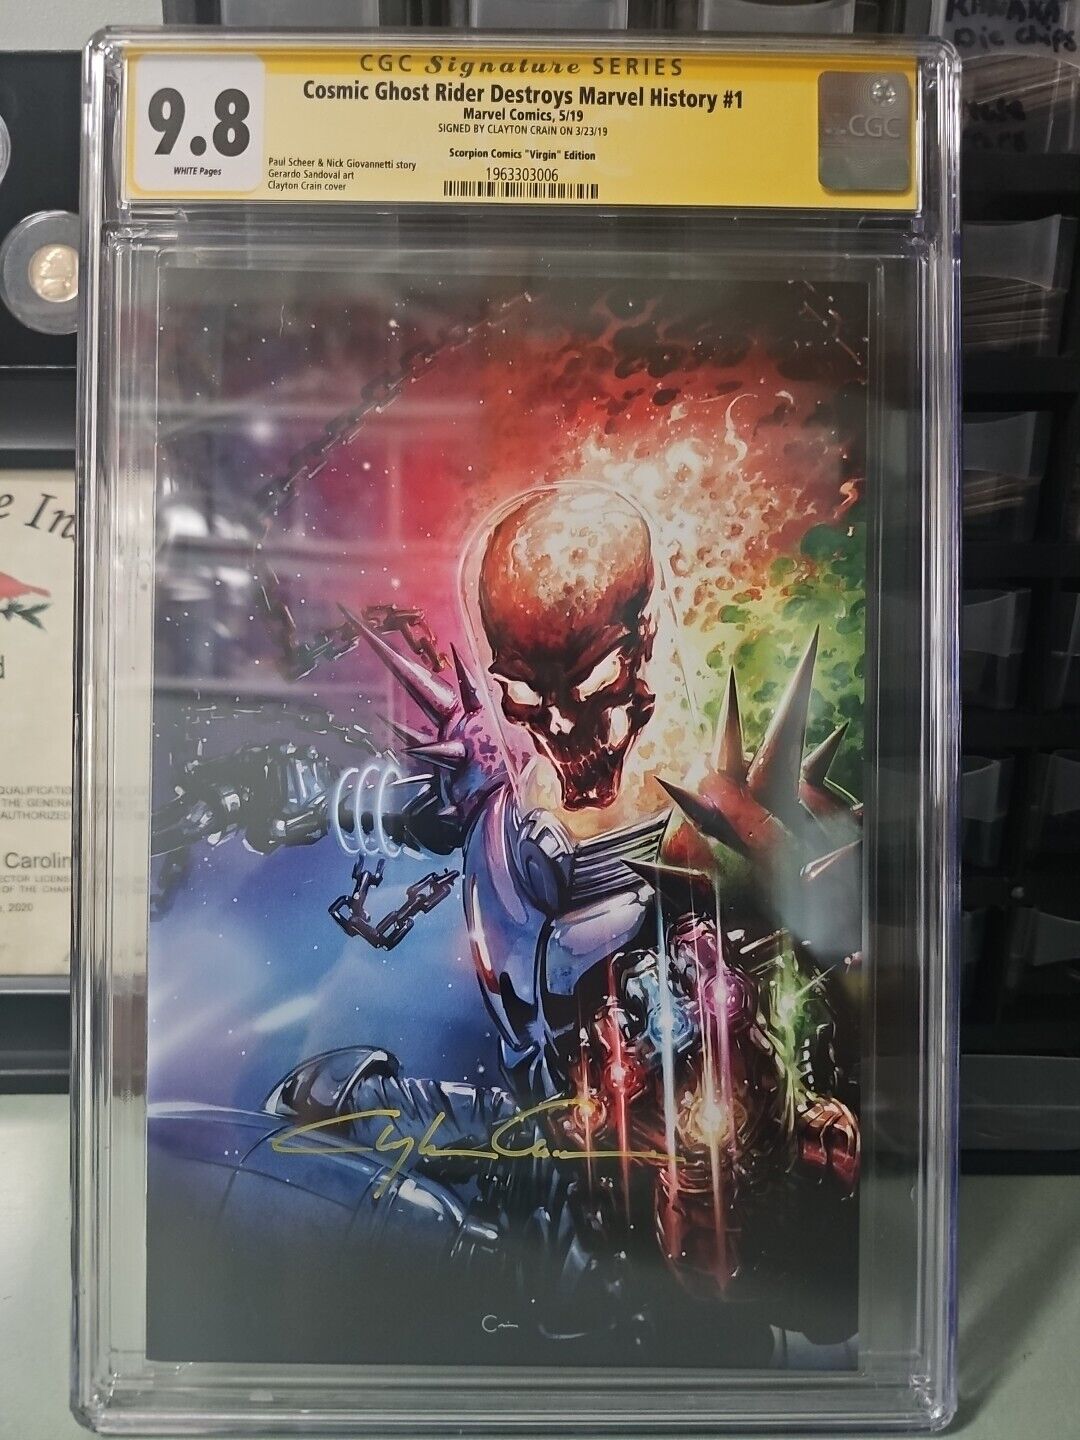 Cosmic Ghost Rider Destroys Marvel History #1 CGC  9.8 signed By Clayton Crain